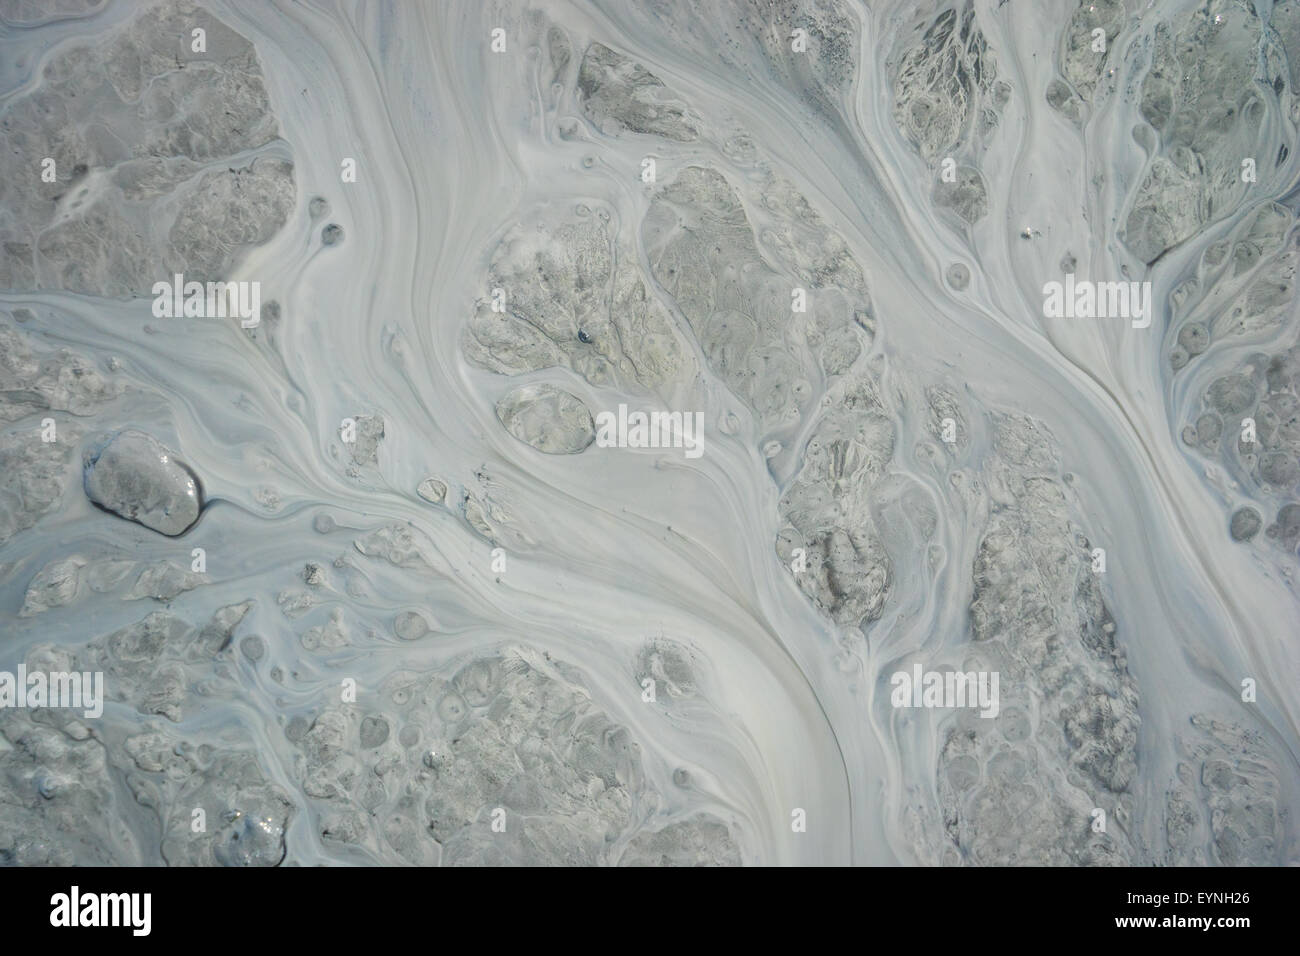 Pattern of silt and mud flow in dirty stream in Alaska. Stock Photo